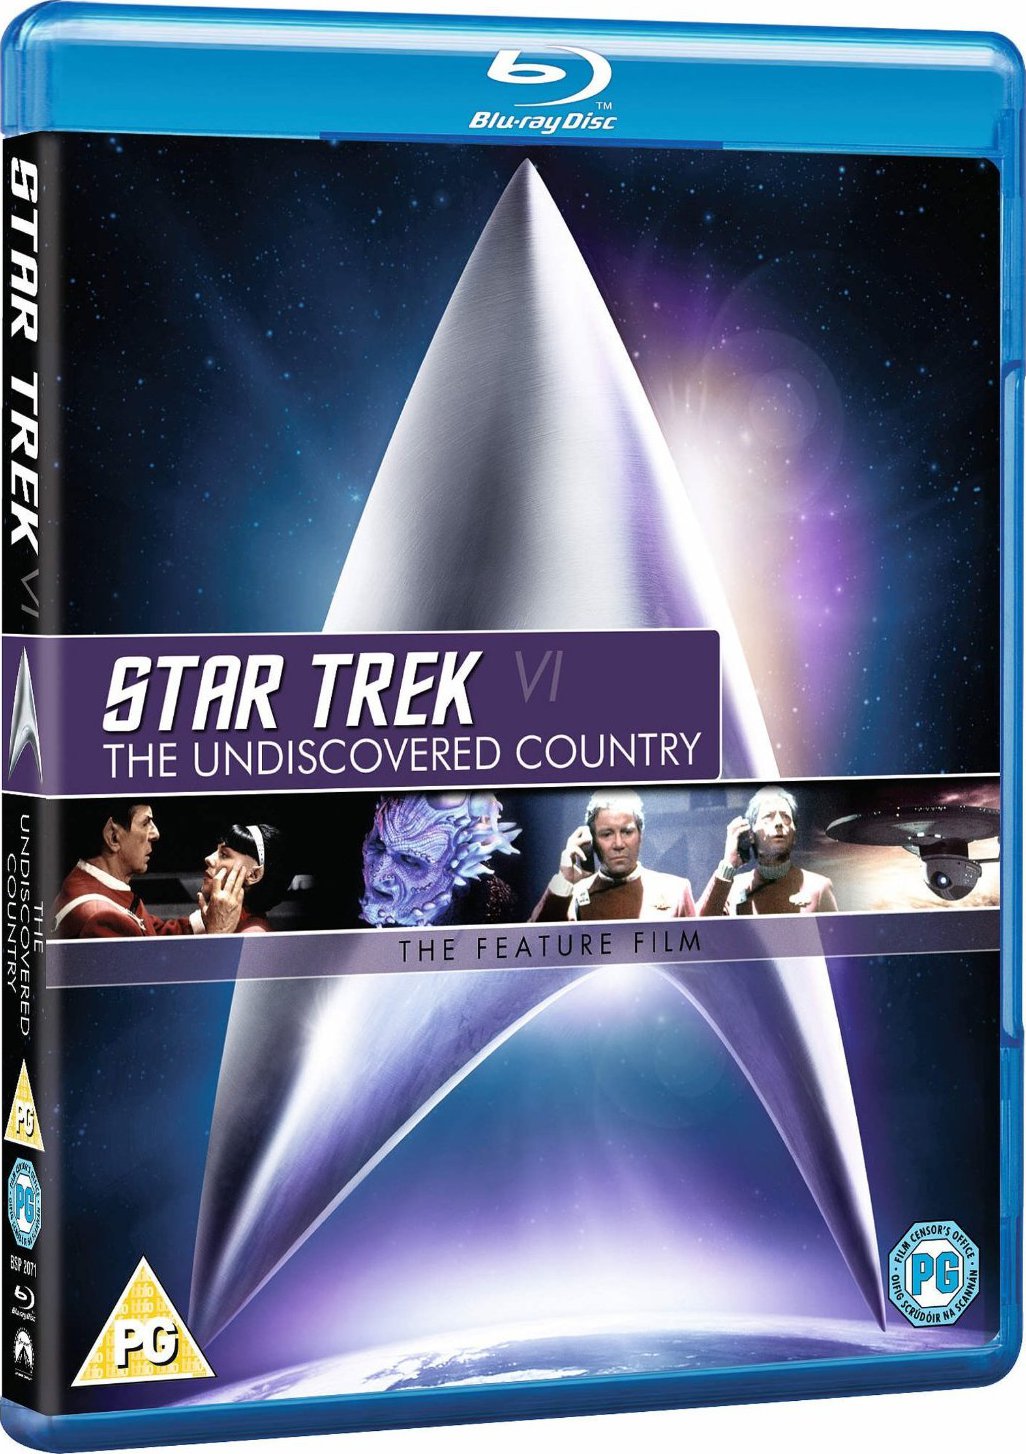 Star Trek VI: The Undiscovered Country #26